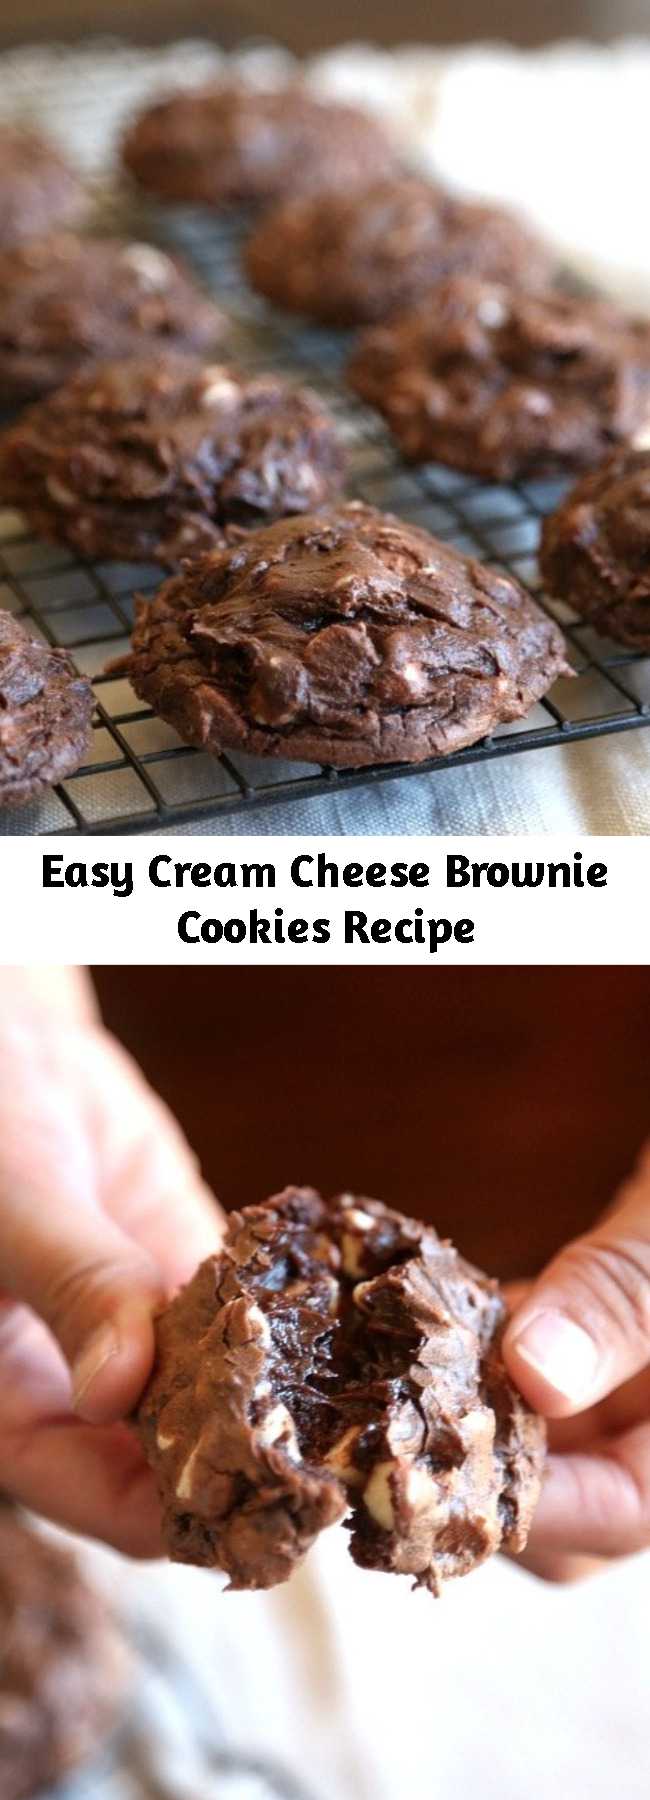 Easy Cream Cheese Brownie Cookies Recipe - These Cream Cheese Brownie Cookies are ridiculously gooey and fudgy! They’re also super simple made with a brownie mix! This cream cheese brookie recipe is the chocolate dessert of your wildest dreams!